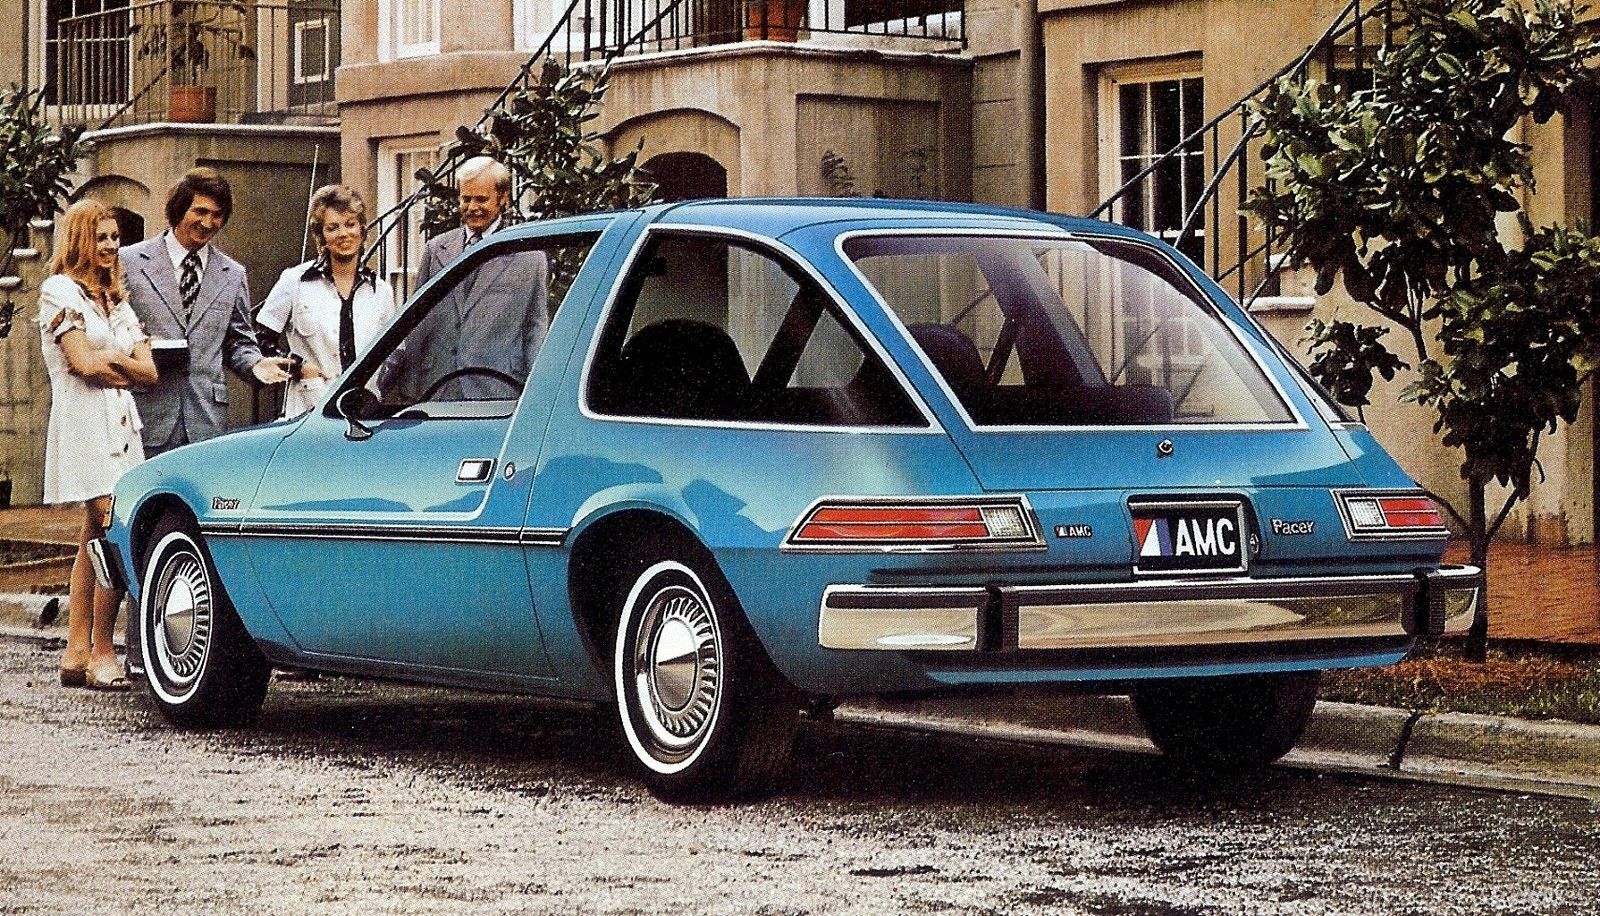 These 10 American Car Models Are Considered The Worst Cars Ever Produced